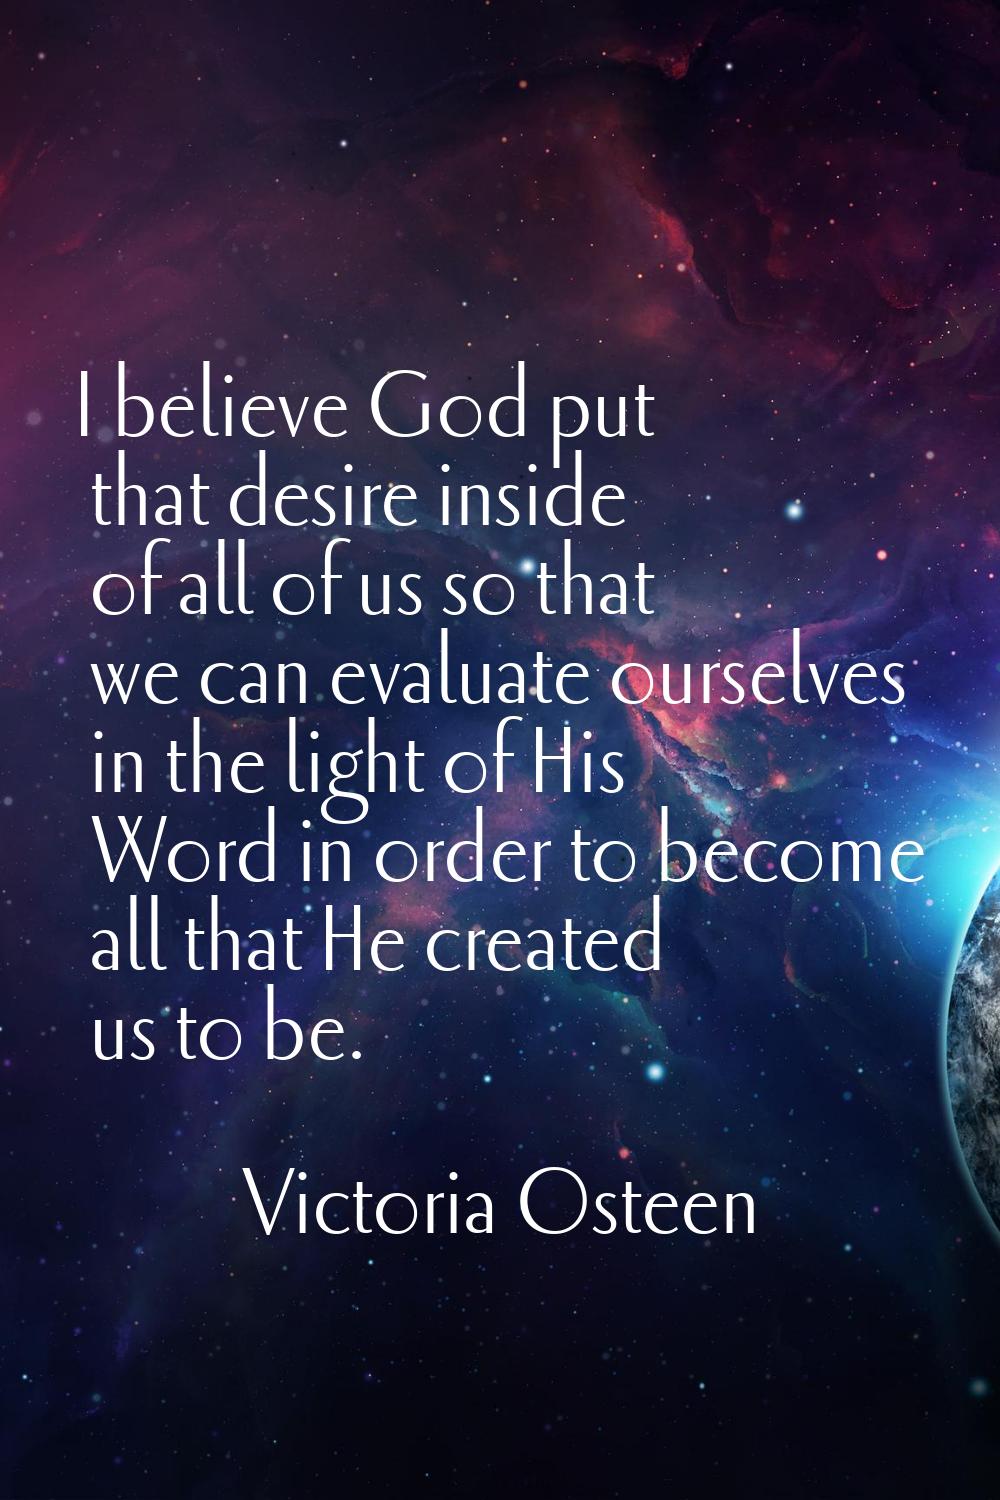 I believe God put that desire inside of all of us so that we can evaluate ourselves in the light of